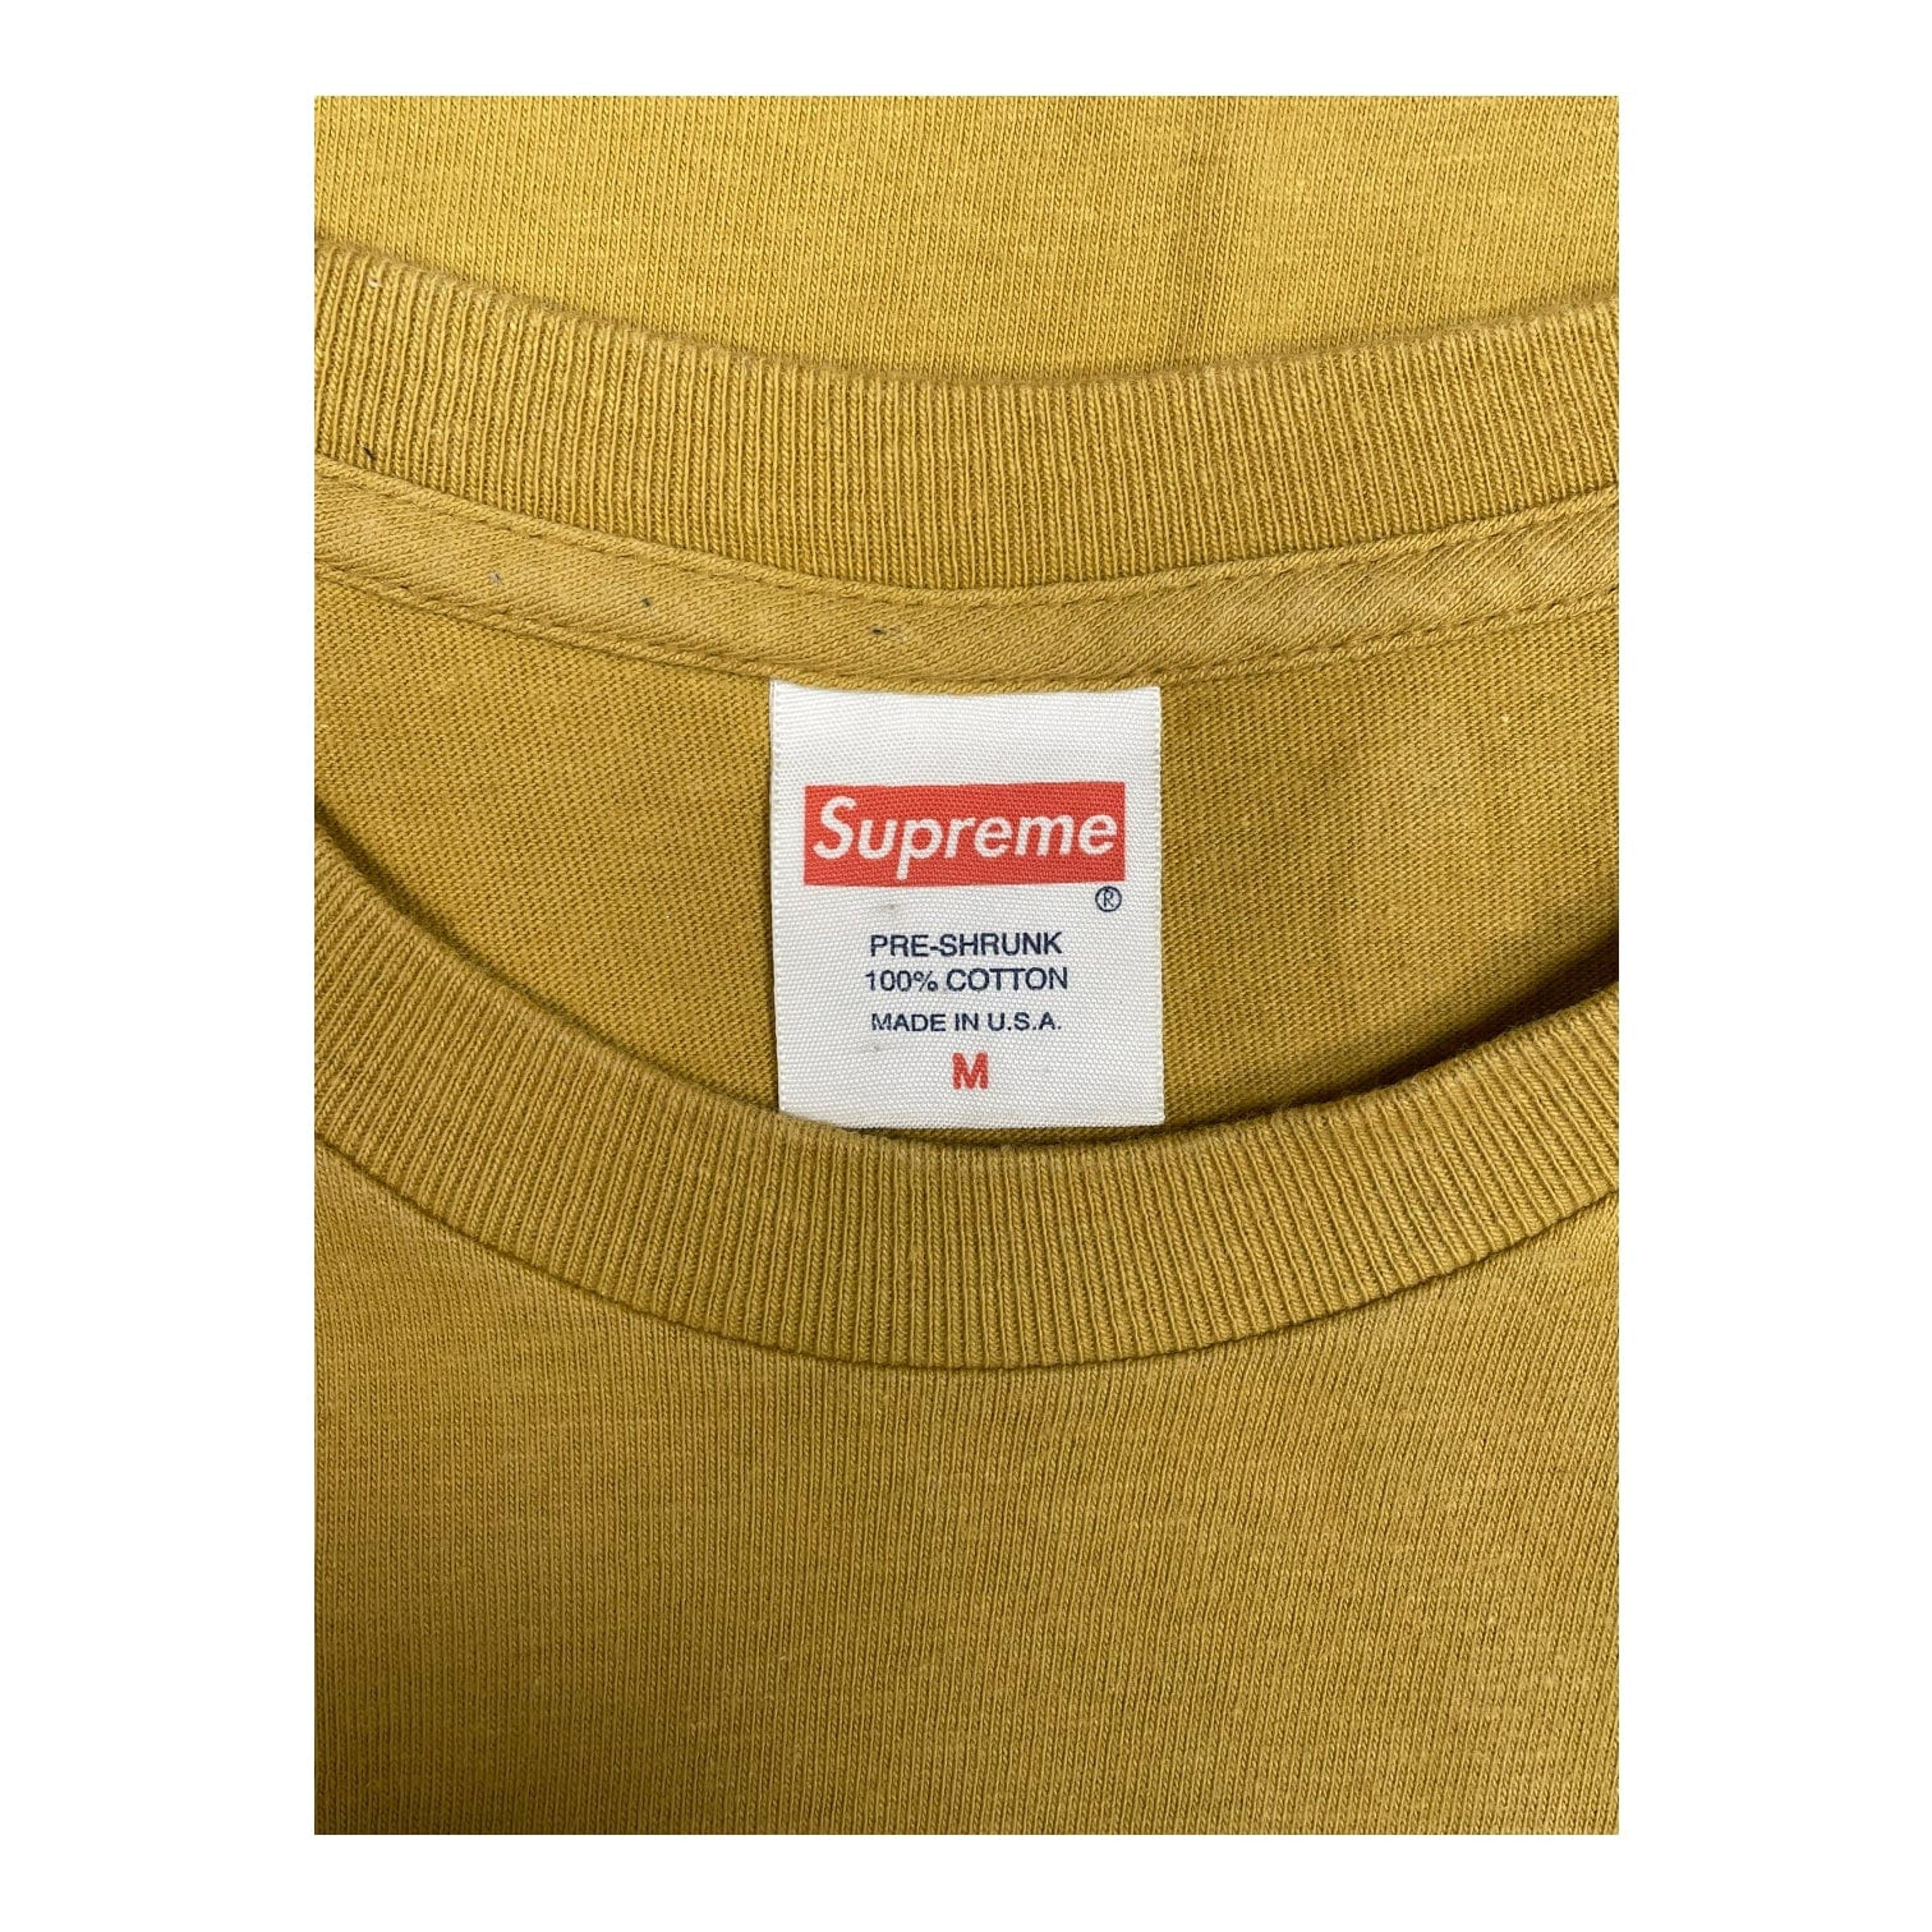 Alternate View 2 of Supreme Morrissey Short Sleeve Tee Shirt Gold Pre-Owned